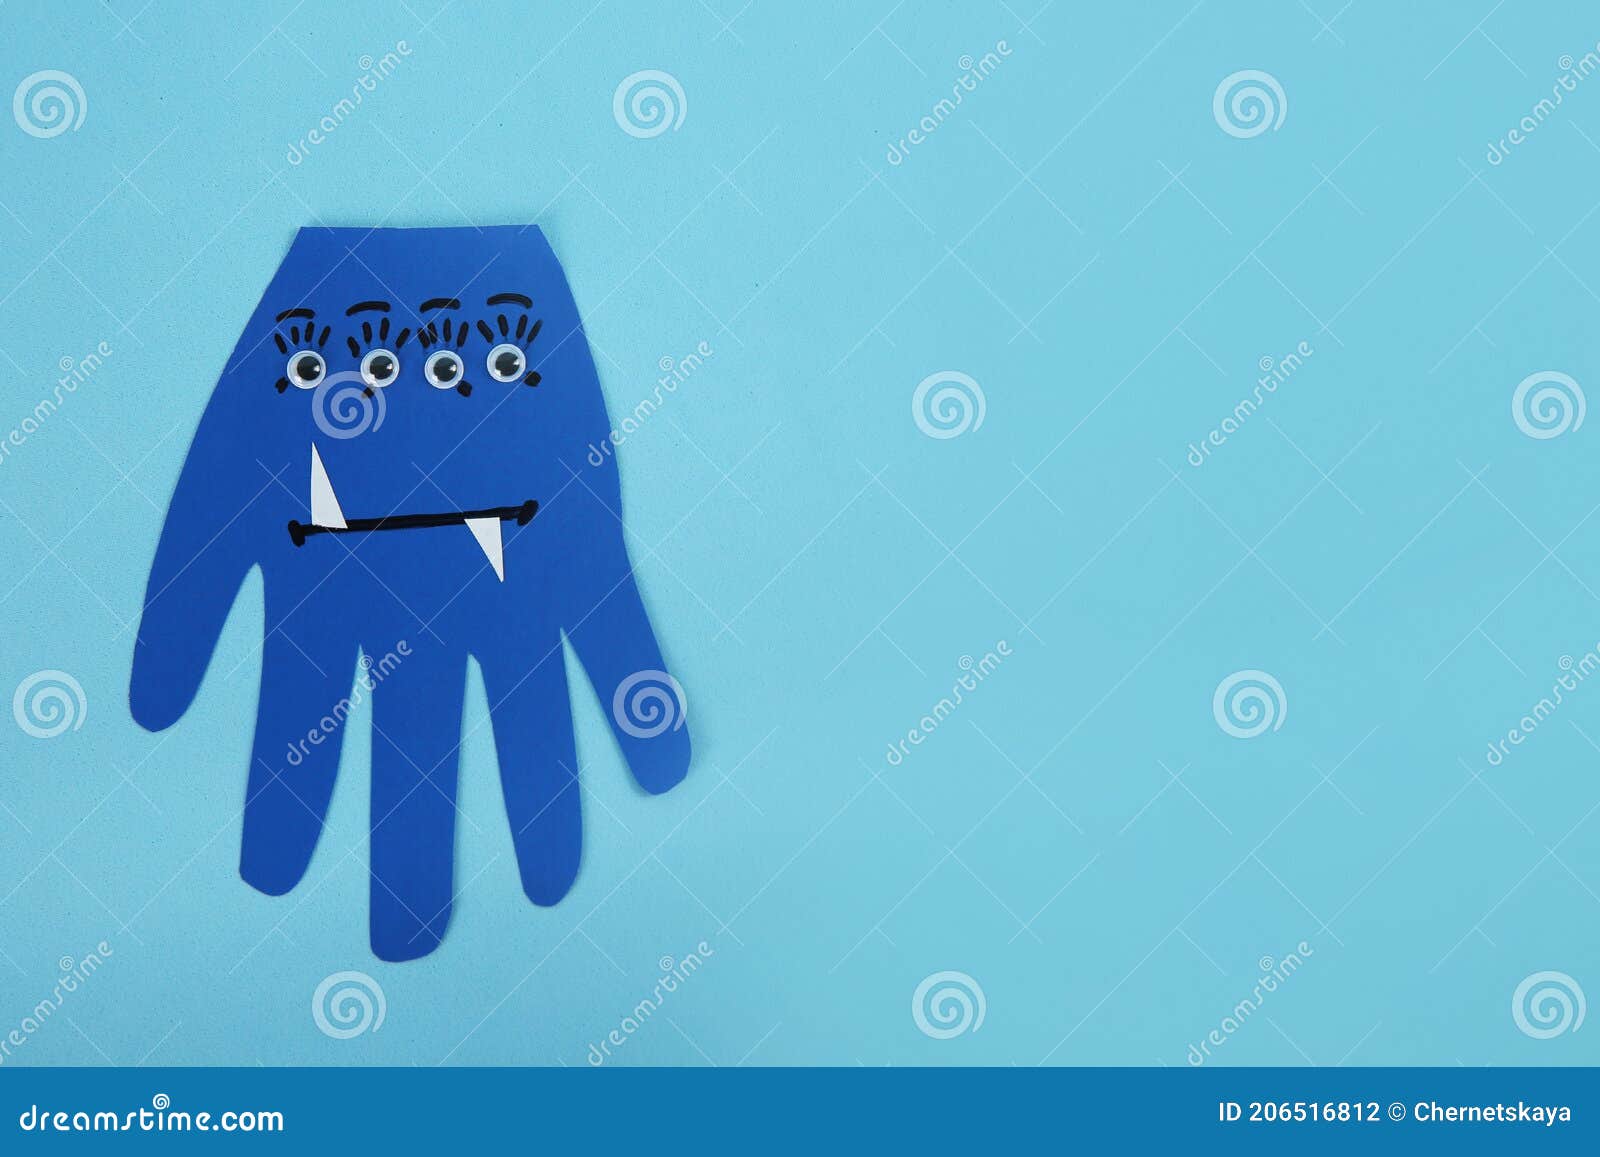 Funny Hand Shaped Monster on Light Blue Background, Top View with